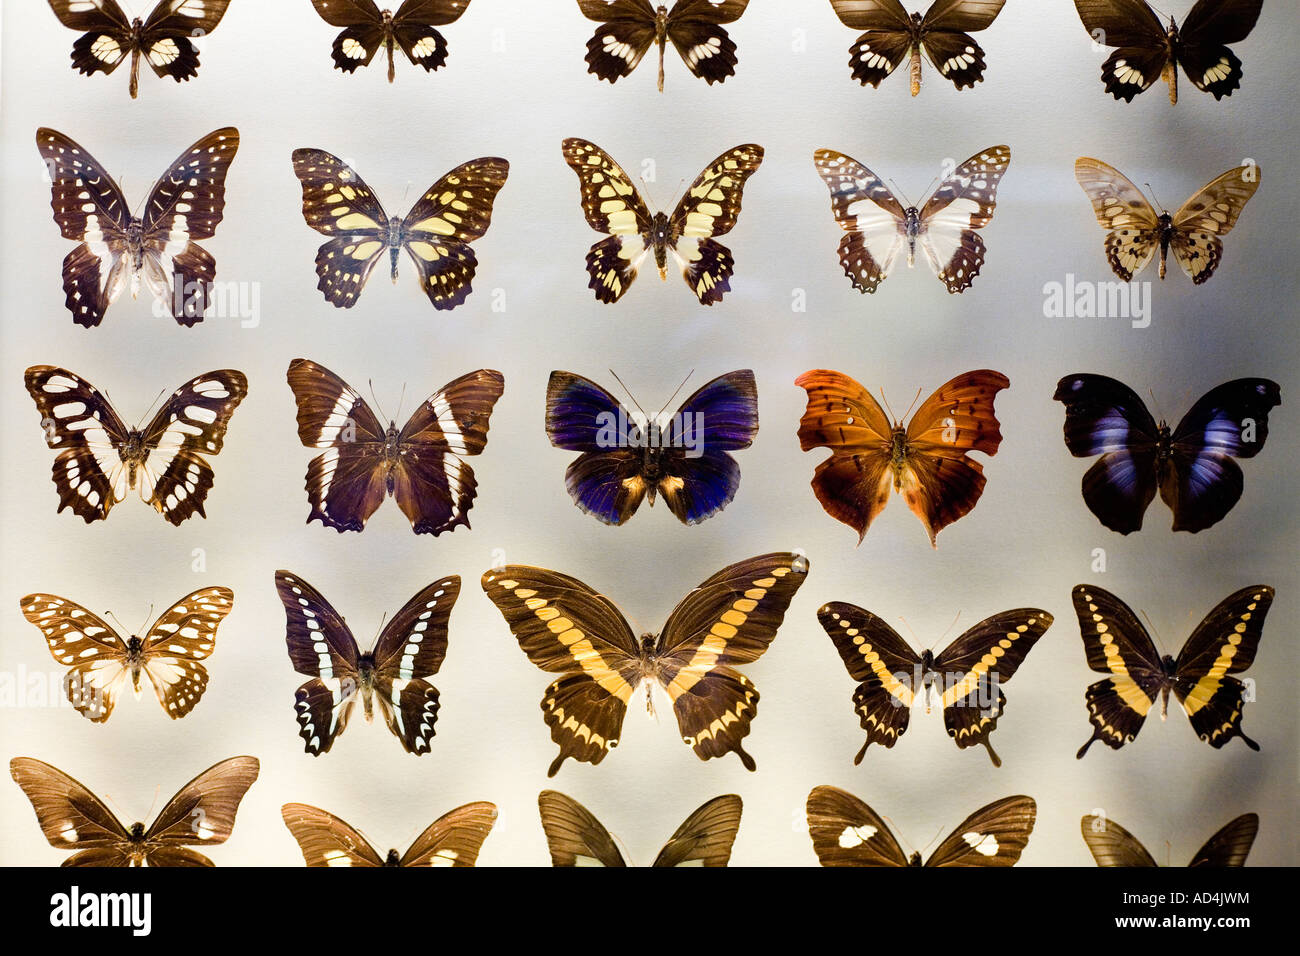 Butterflies in a museum display Stock Photo